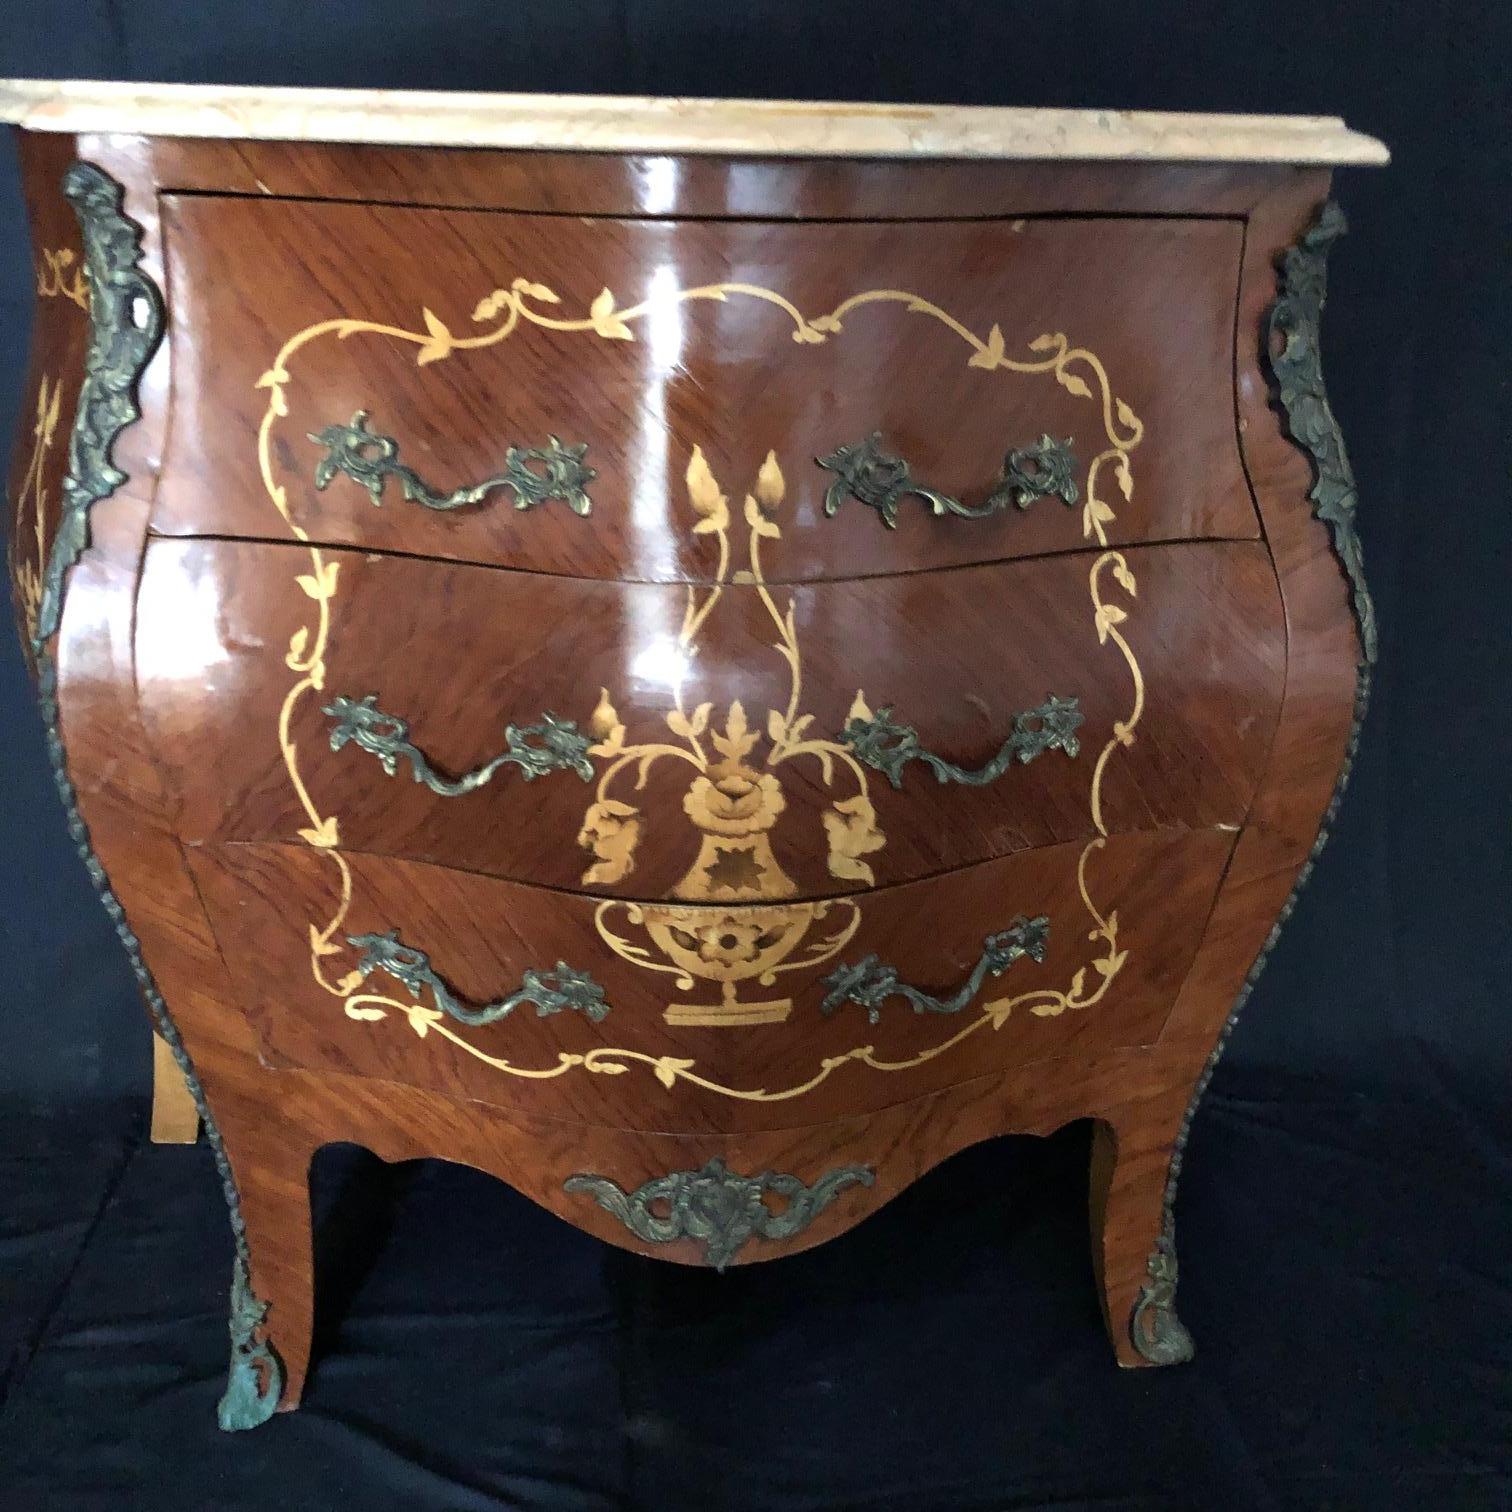 Gorgeous French Louis XV side table or nightstand with beautifully detailed inlaid floral patterns and cream marble top that coordinates with the inlays. On the front is an inlaid urn with floral decor; exquisite! Complimented by ormolu mounts,